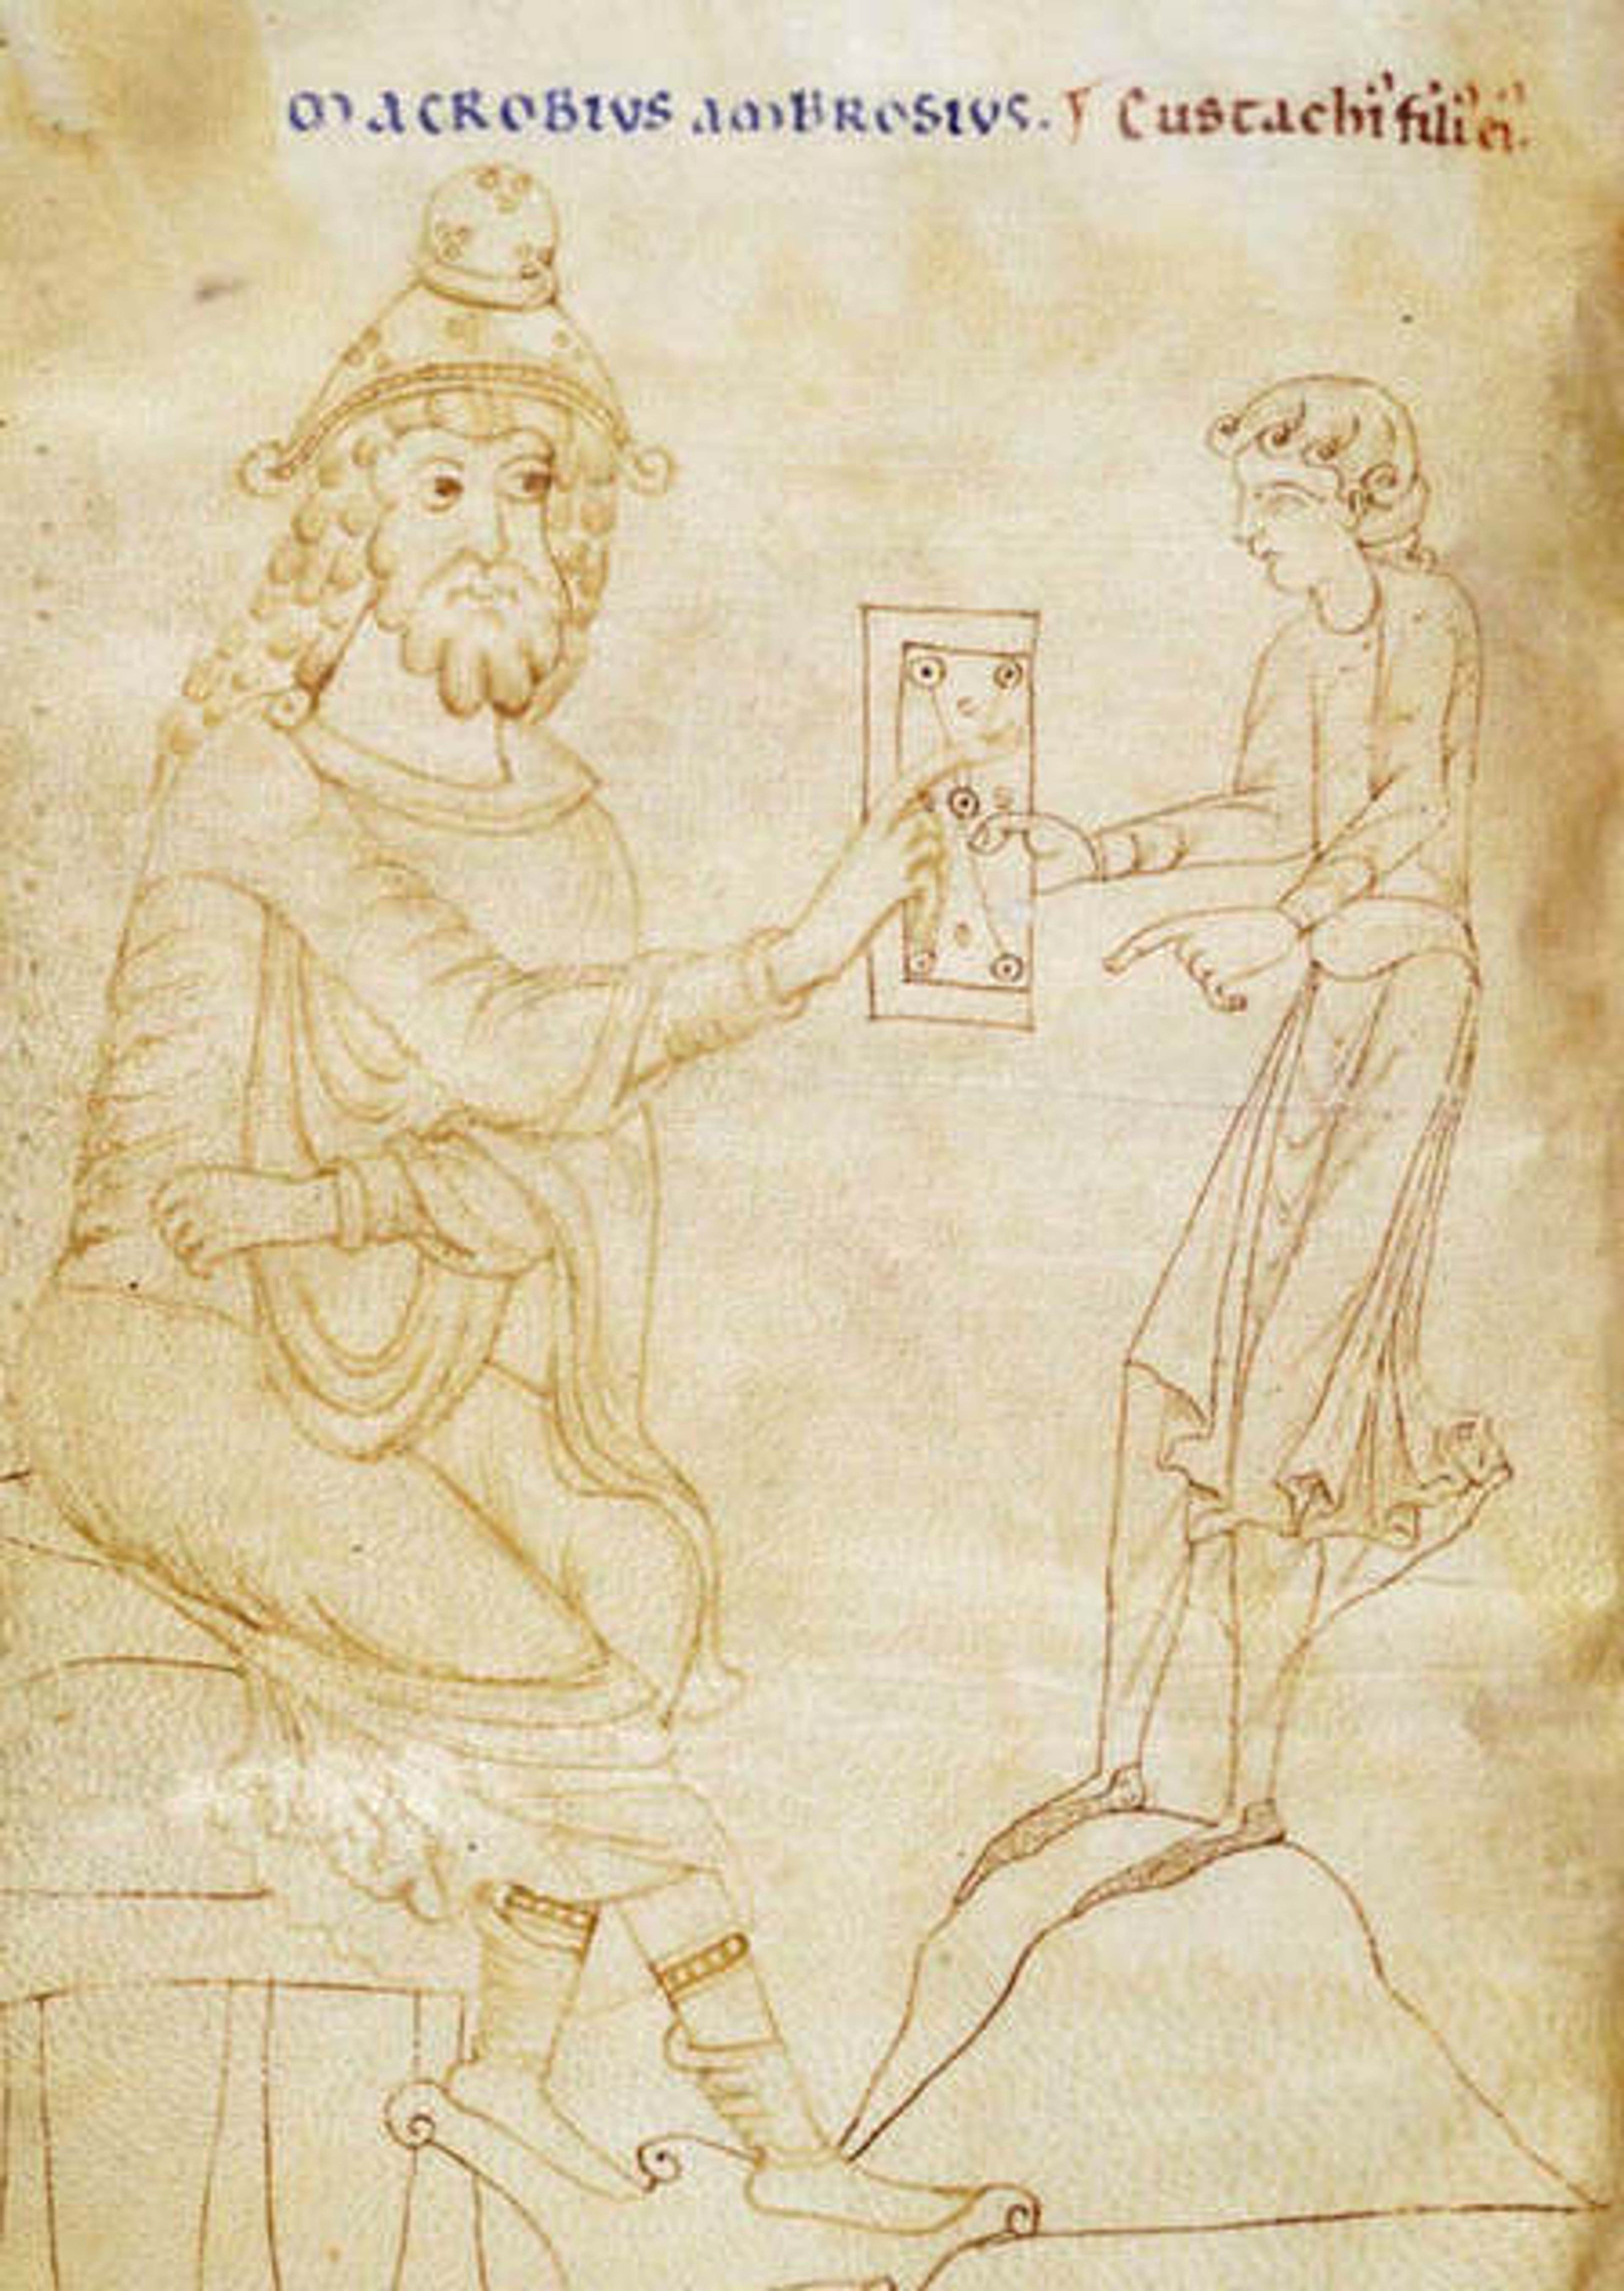 Simple full body portrait of Ambrosius Theodosius Macrobius, a man with curly hair, gesturing to a map held up by another man.